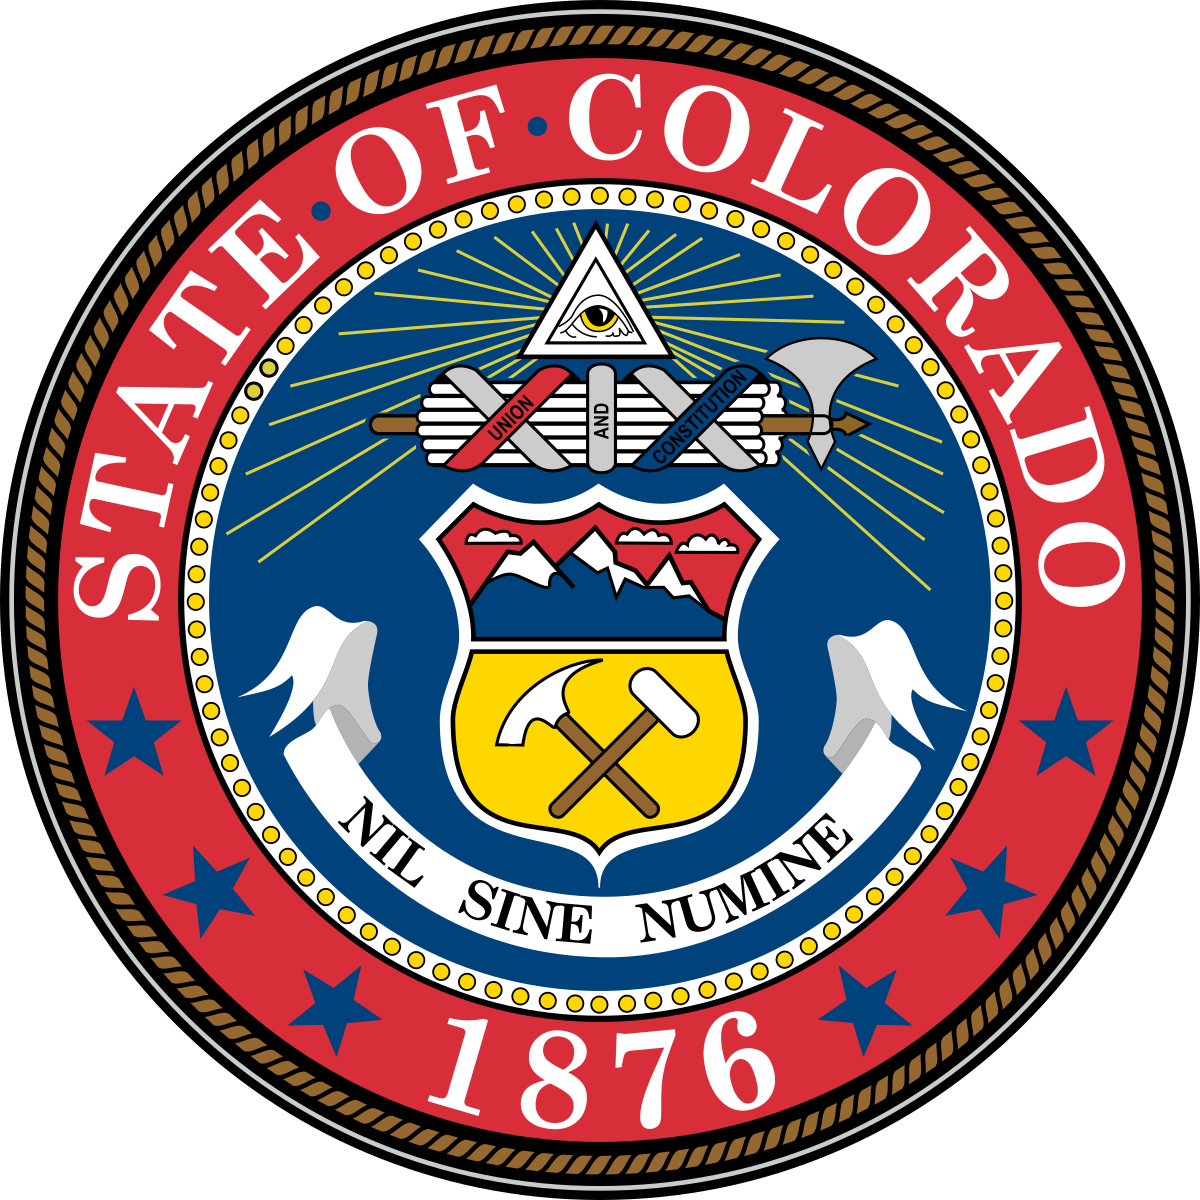 Colorado General Assembly